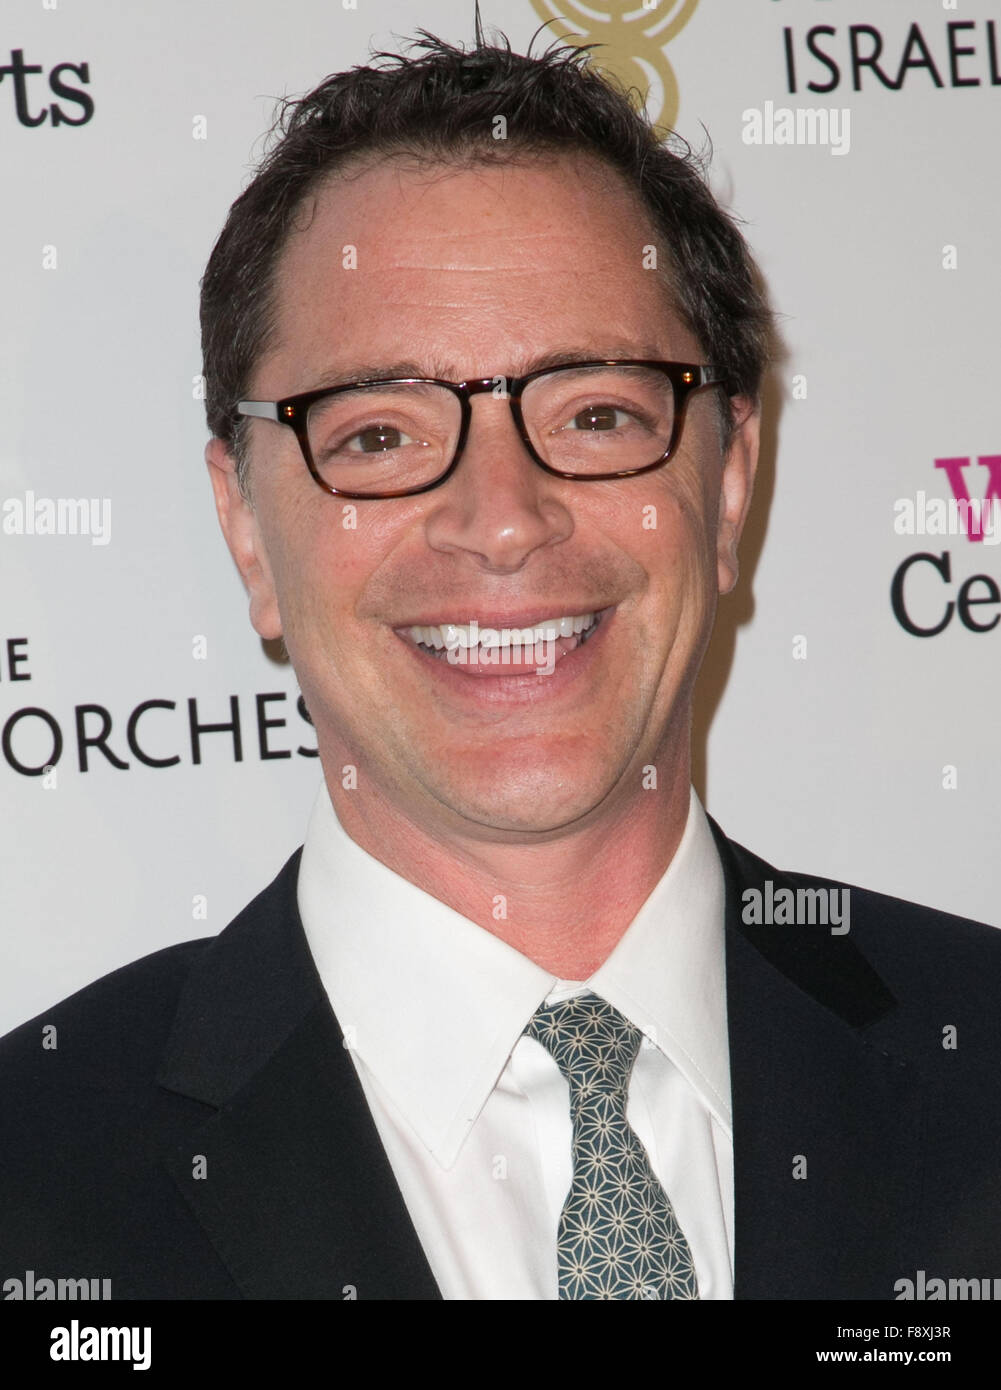 Celebrities attend The Wallis Annenberg Center for the Performing Arts and the American Friends of the Israel Philharmonic Orchestra’s “Duet Gala” at Wallis Annenberg Center for the Performing Arts in Beverly Hills.  Featuring: Joshua Malina Where: Los An Stock Photo